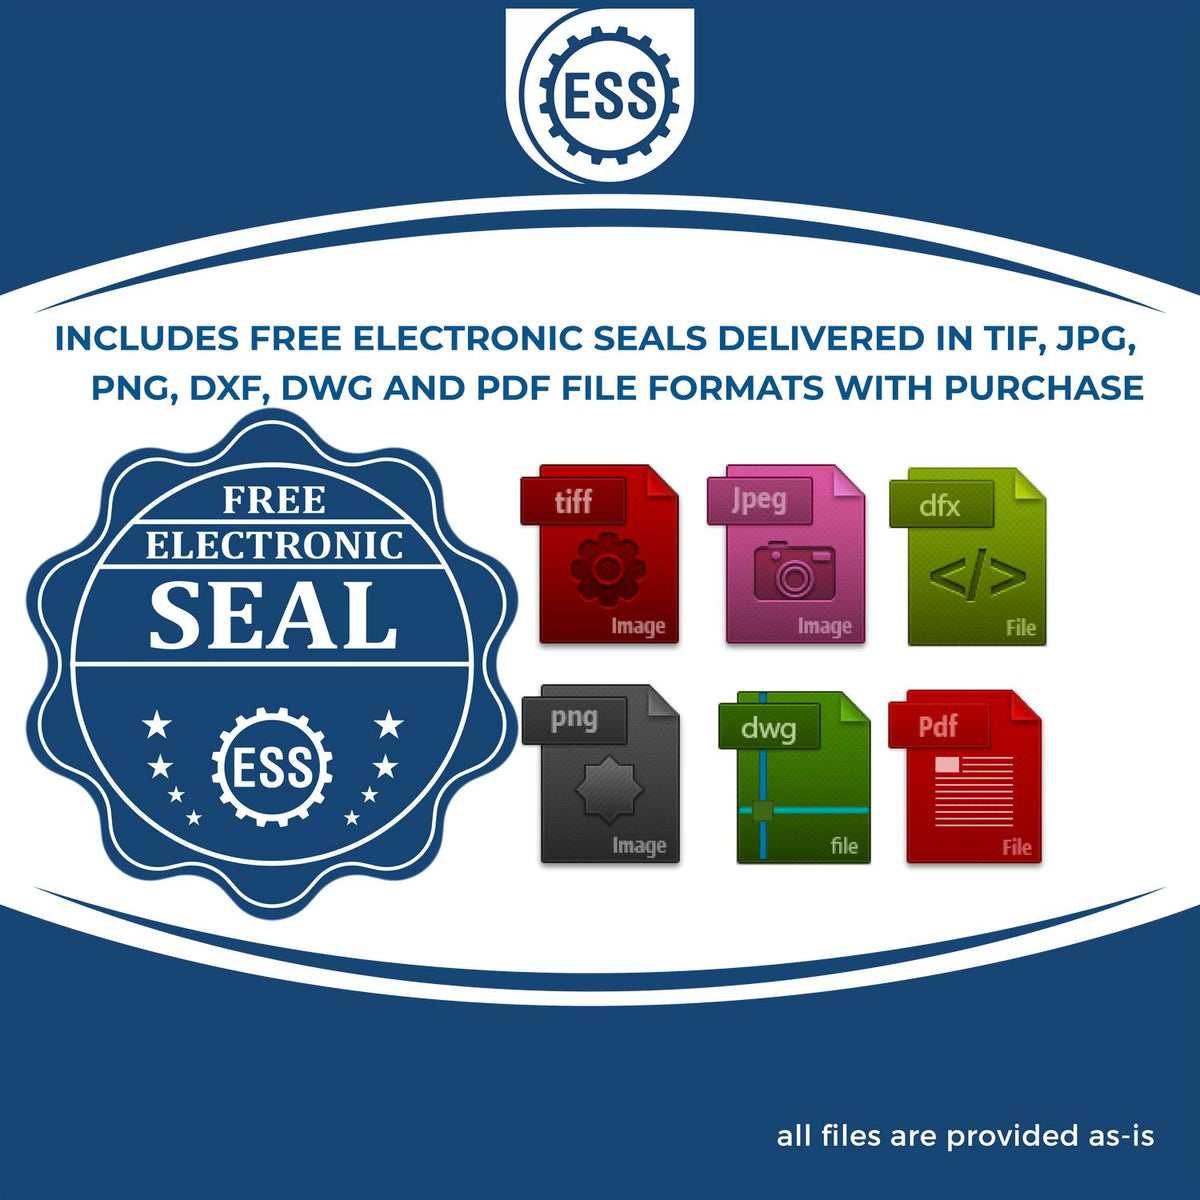 An infographic for the free electronic seal for the Heavy Duty Cast Iron Washington Engineer Seal Embosser illustrating the different file type icons such as DXF, DWG, TIF, JPG and PNG.